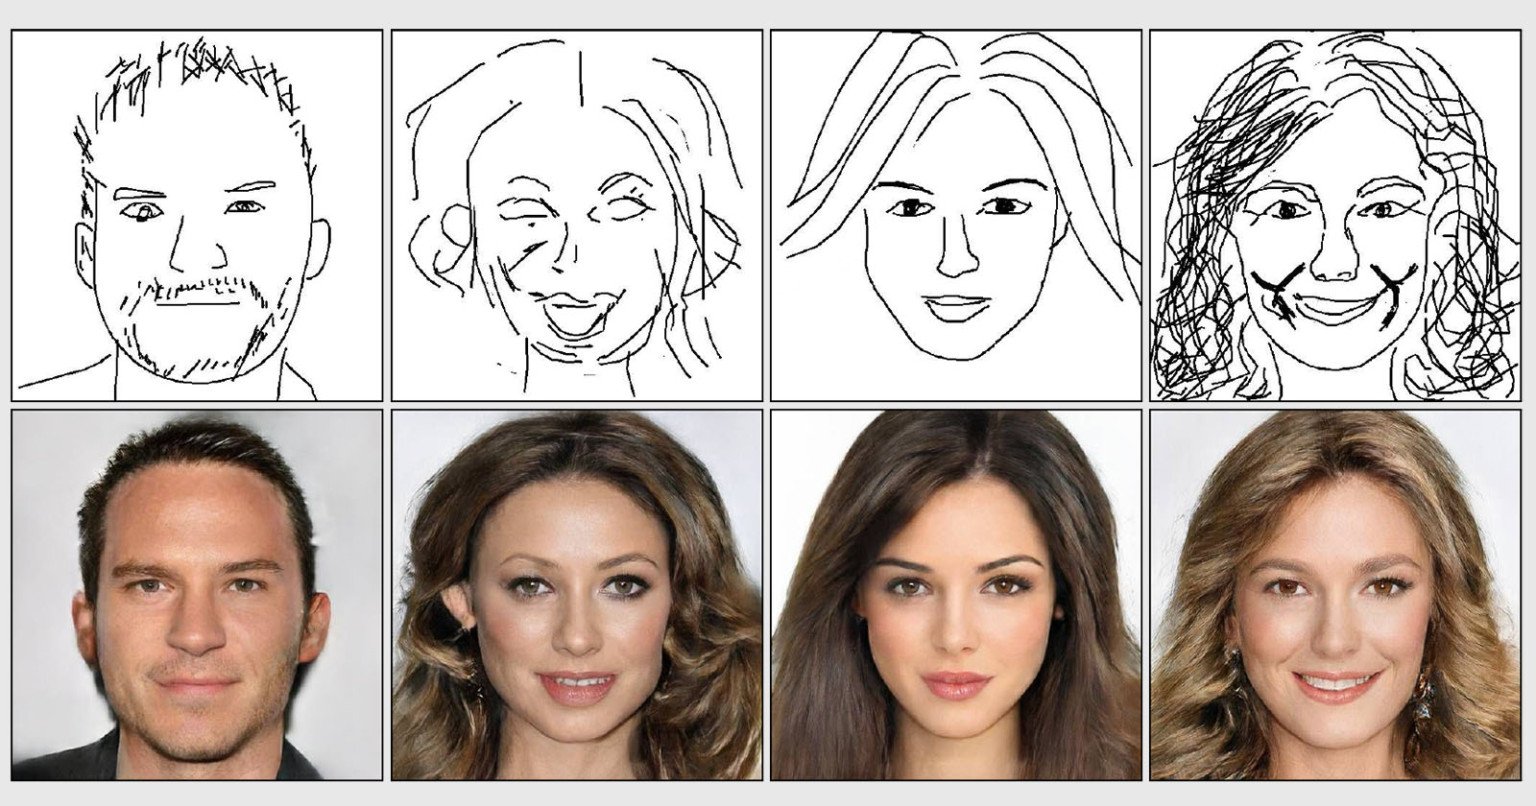 This 'DeepFaceDrawing' AI Turns Simple Sketches Into Portrait Photos